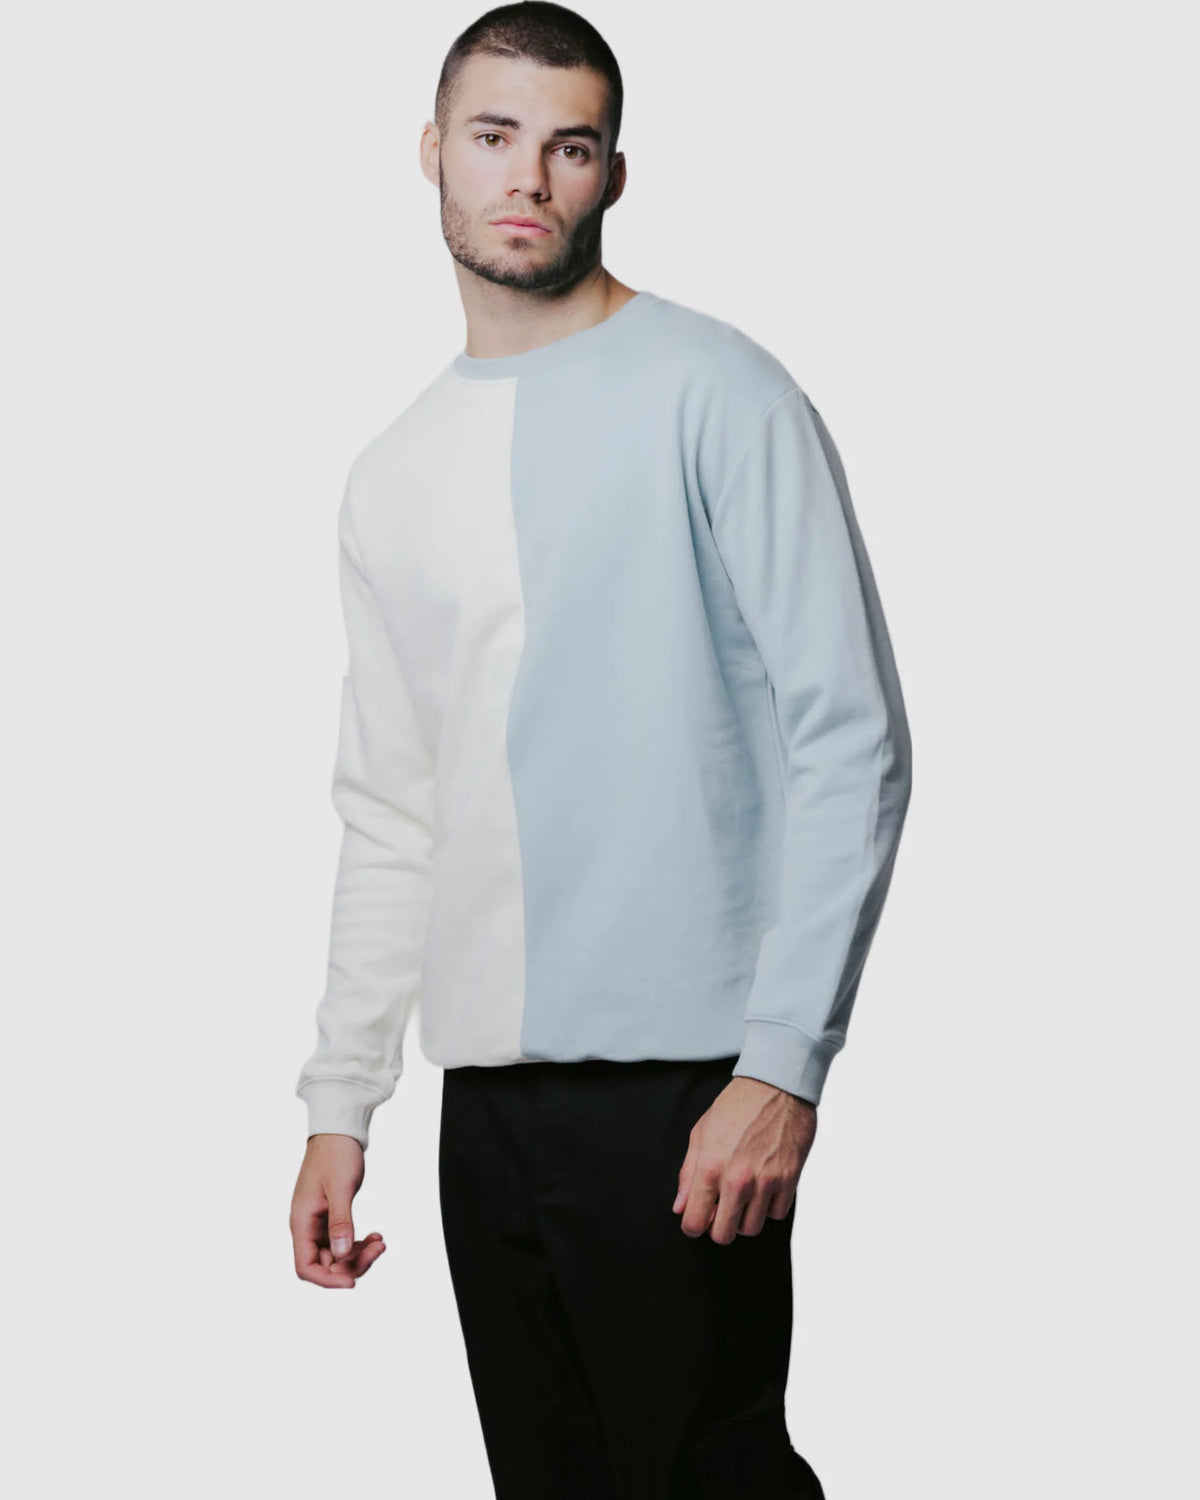 Justin Cassin Ace Jumper in Ivory/Mint Color